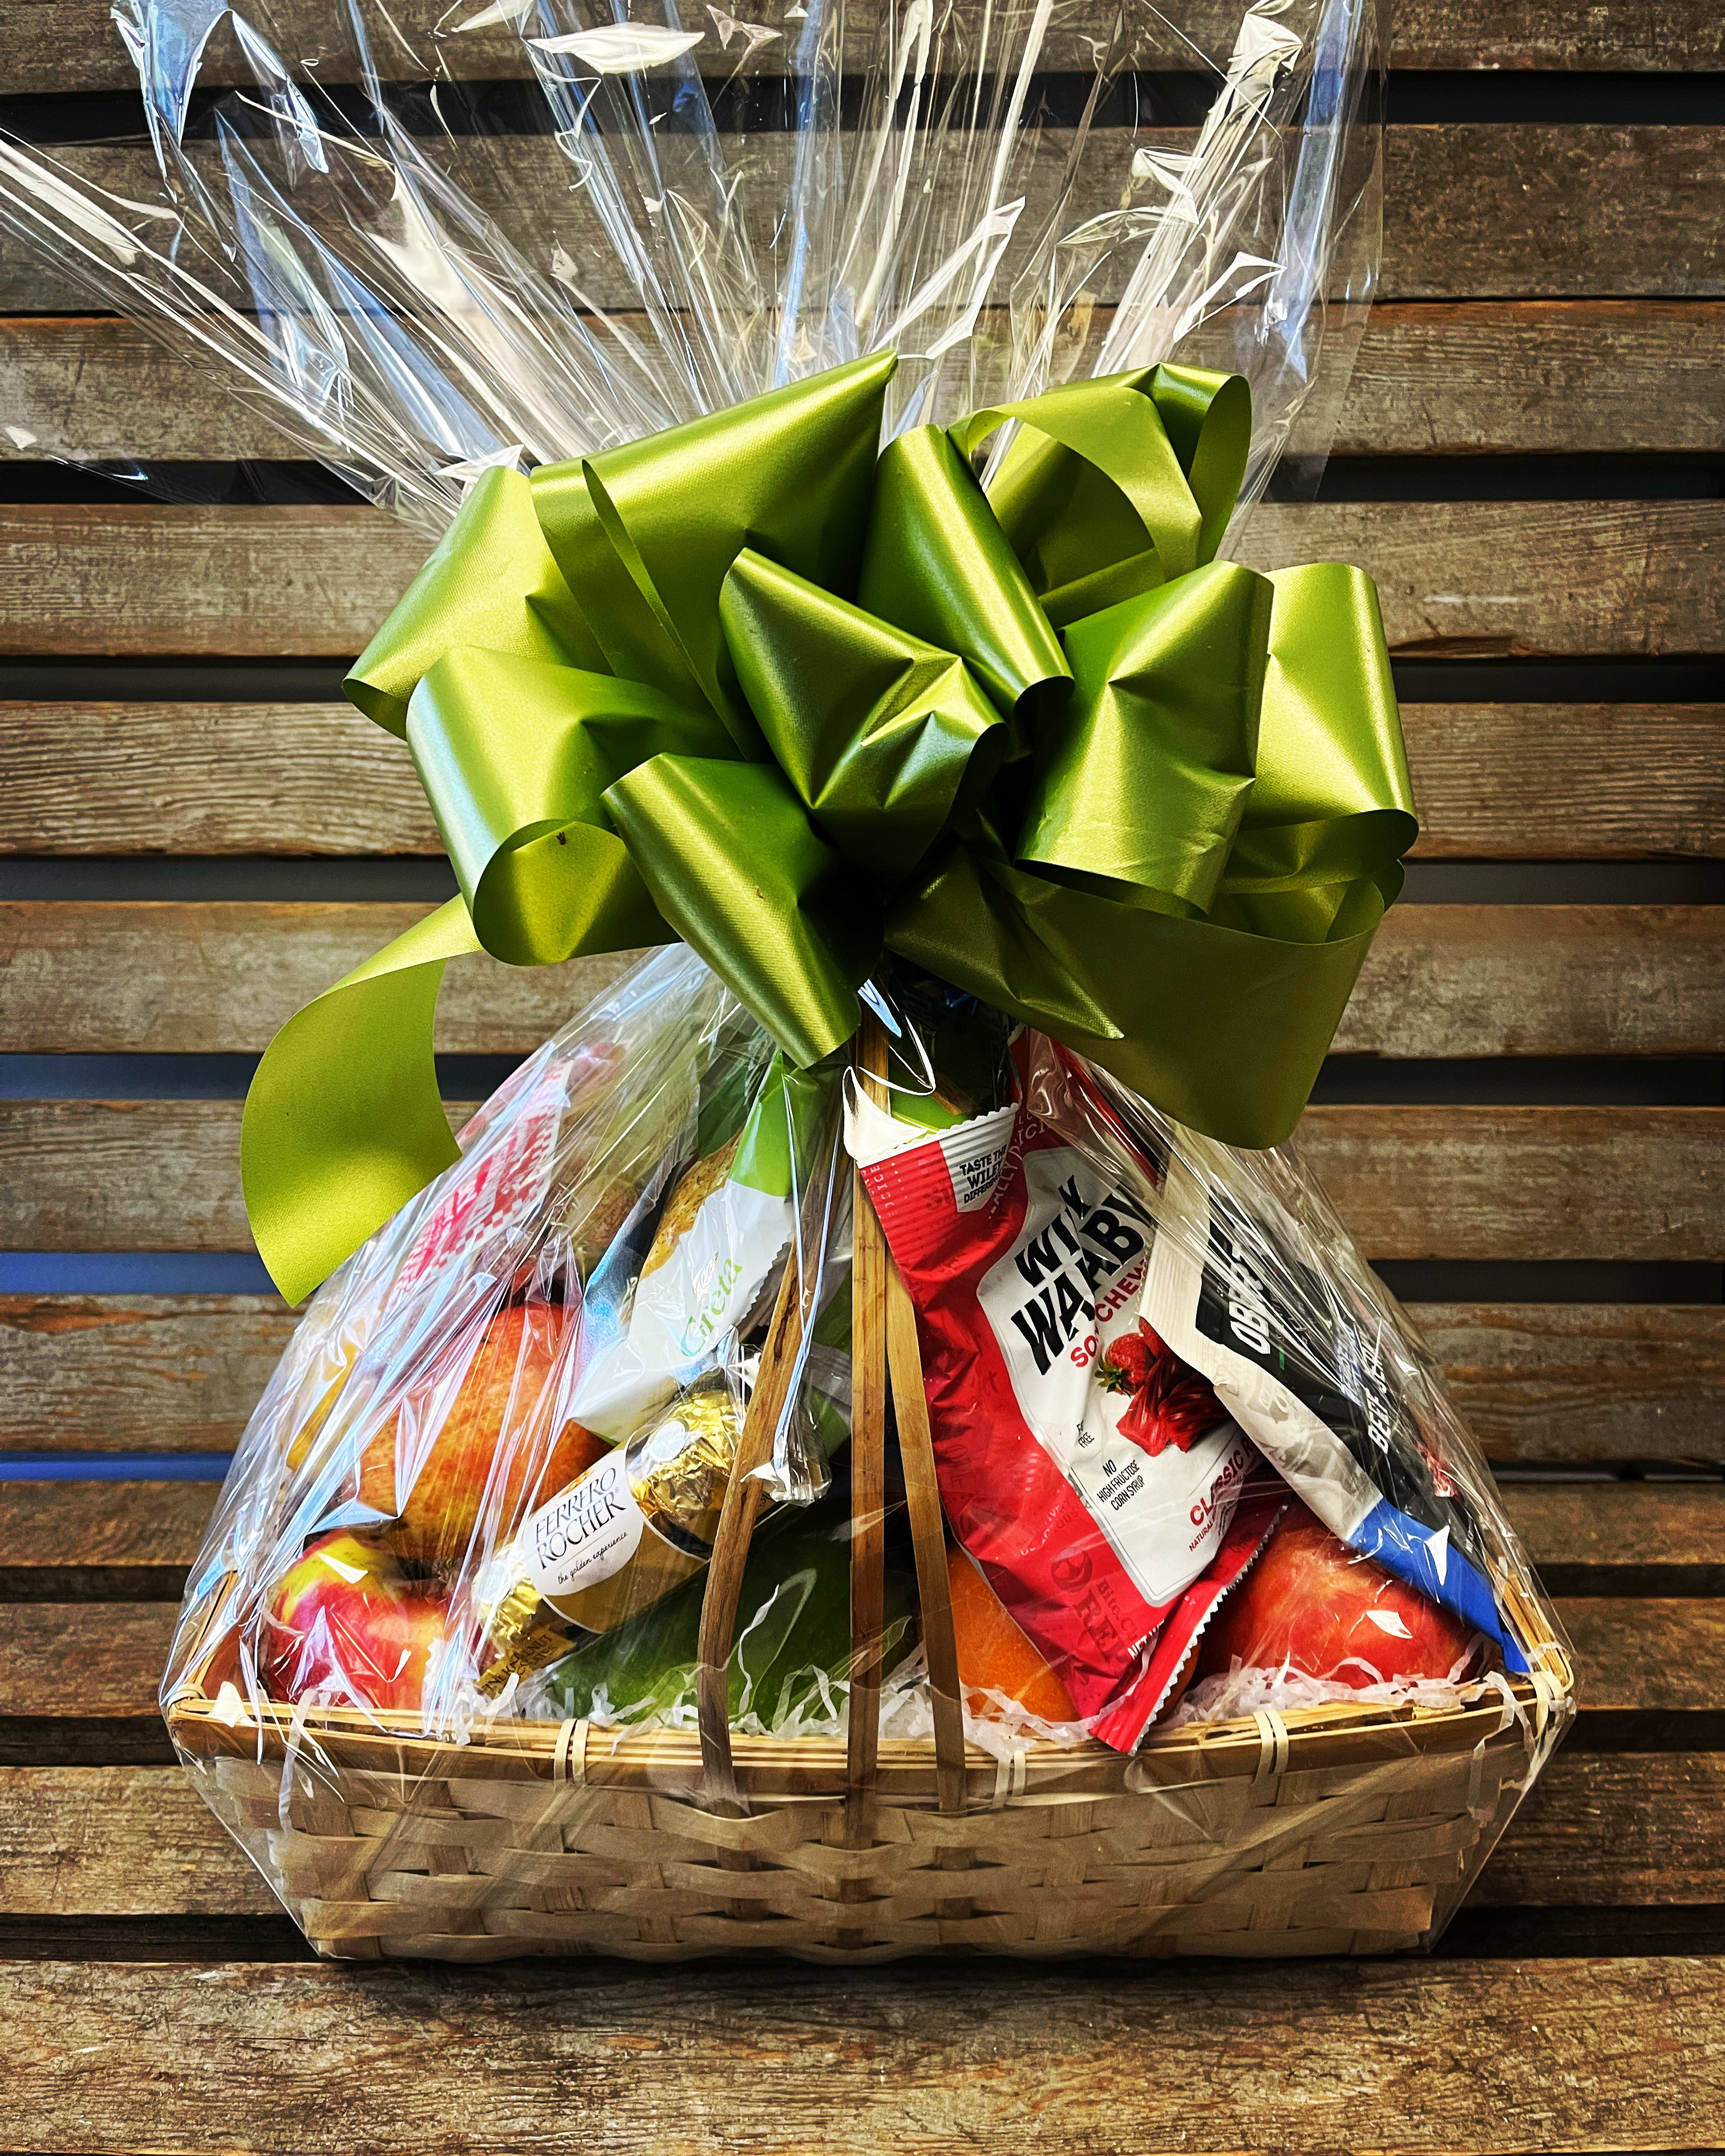  Fruit &amp; Gourmet basket ( WE NEED 24 HOUR NOTICE TO MAKE )  - Goodie basket filled with fruit ,apples , pears ,oranges  bridge mix, chocolate,cheese ,crackers , cookies , hard candy , licorice to name a few. 